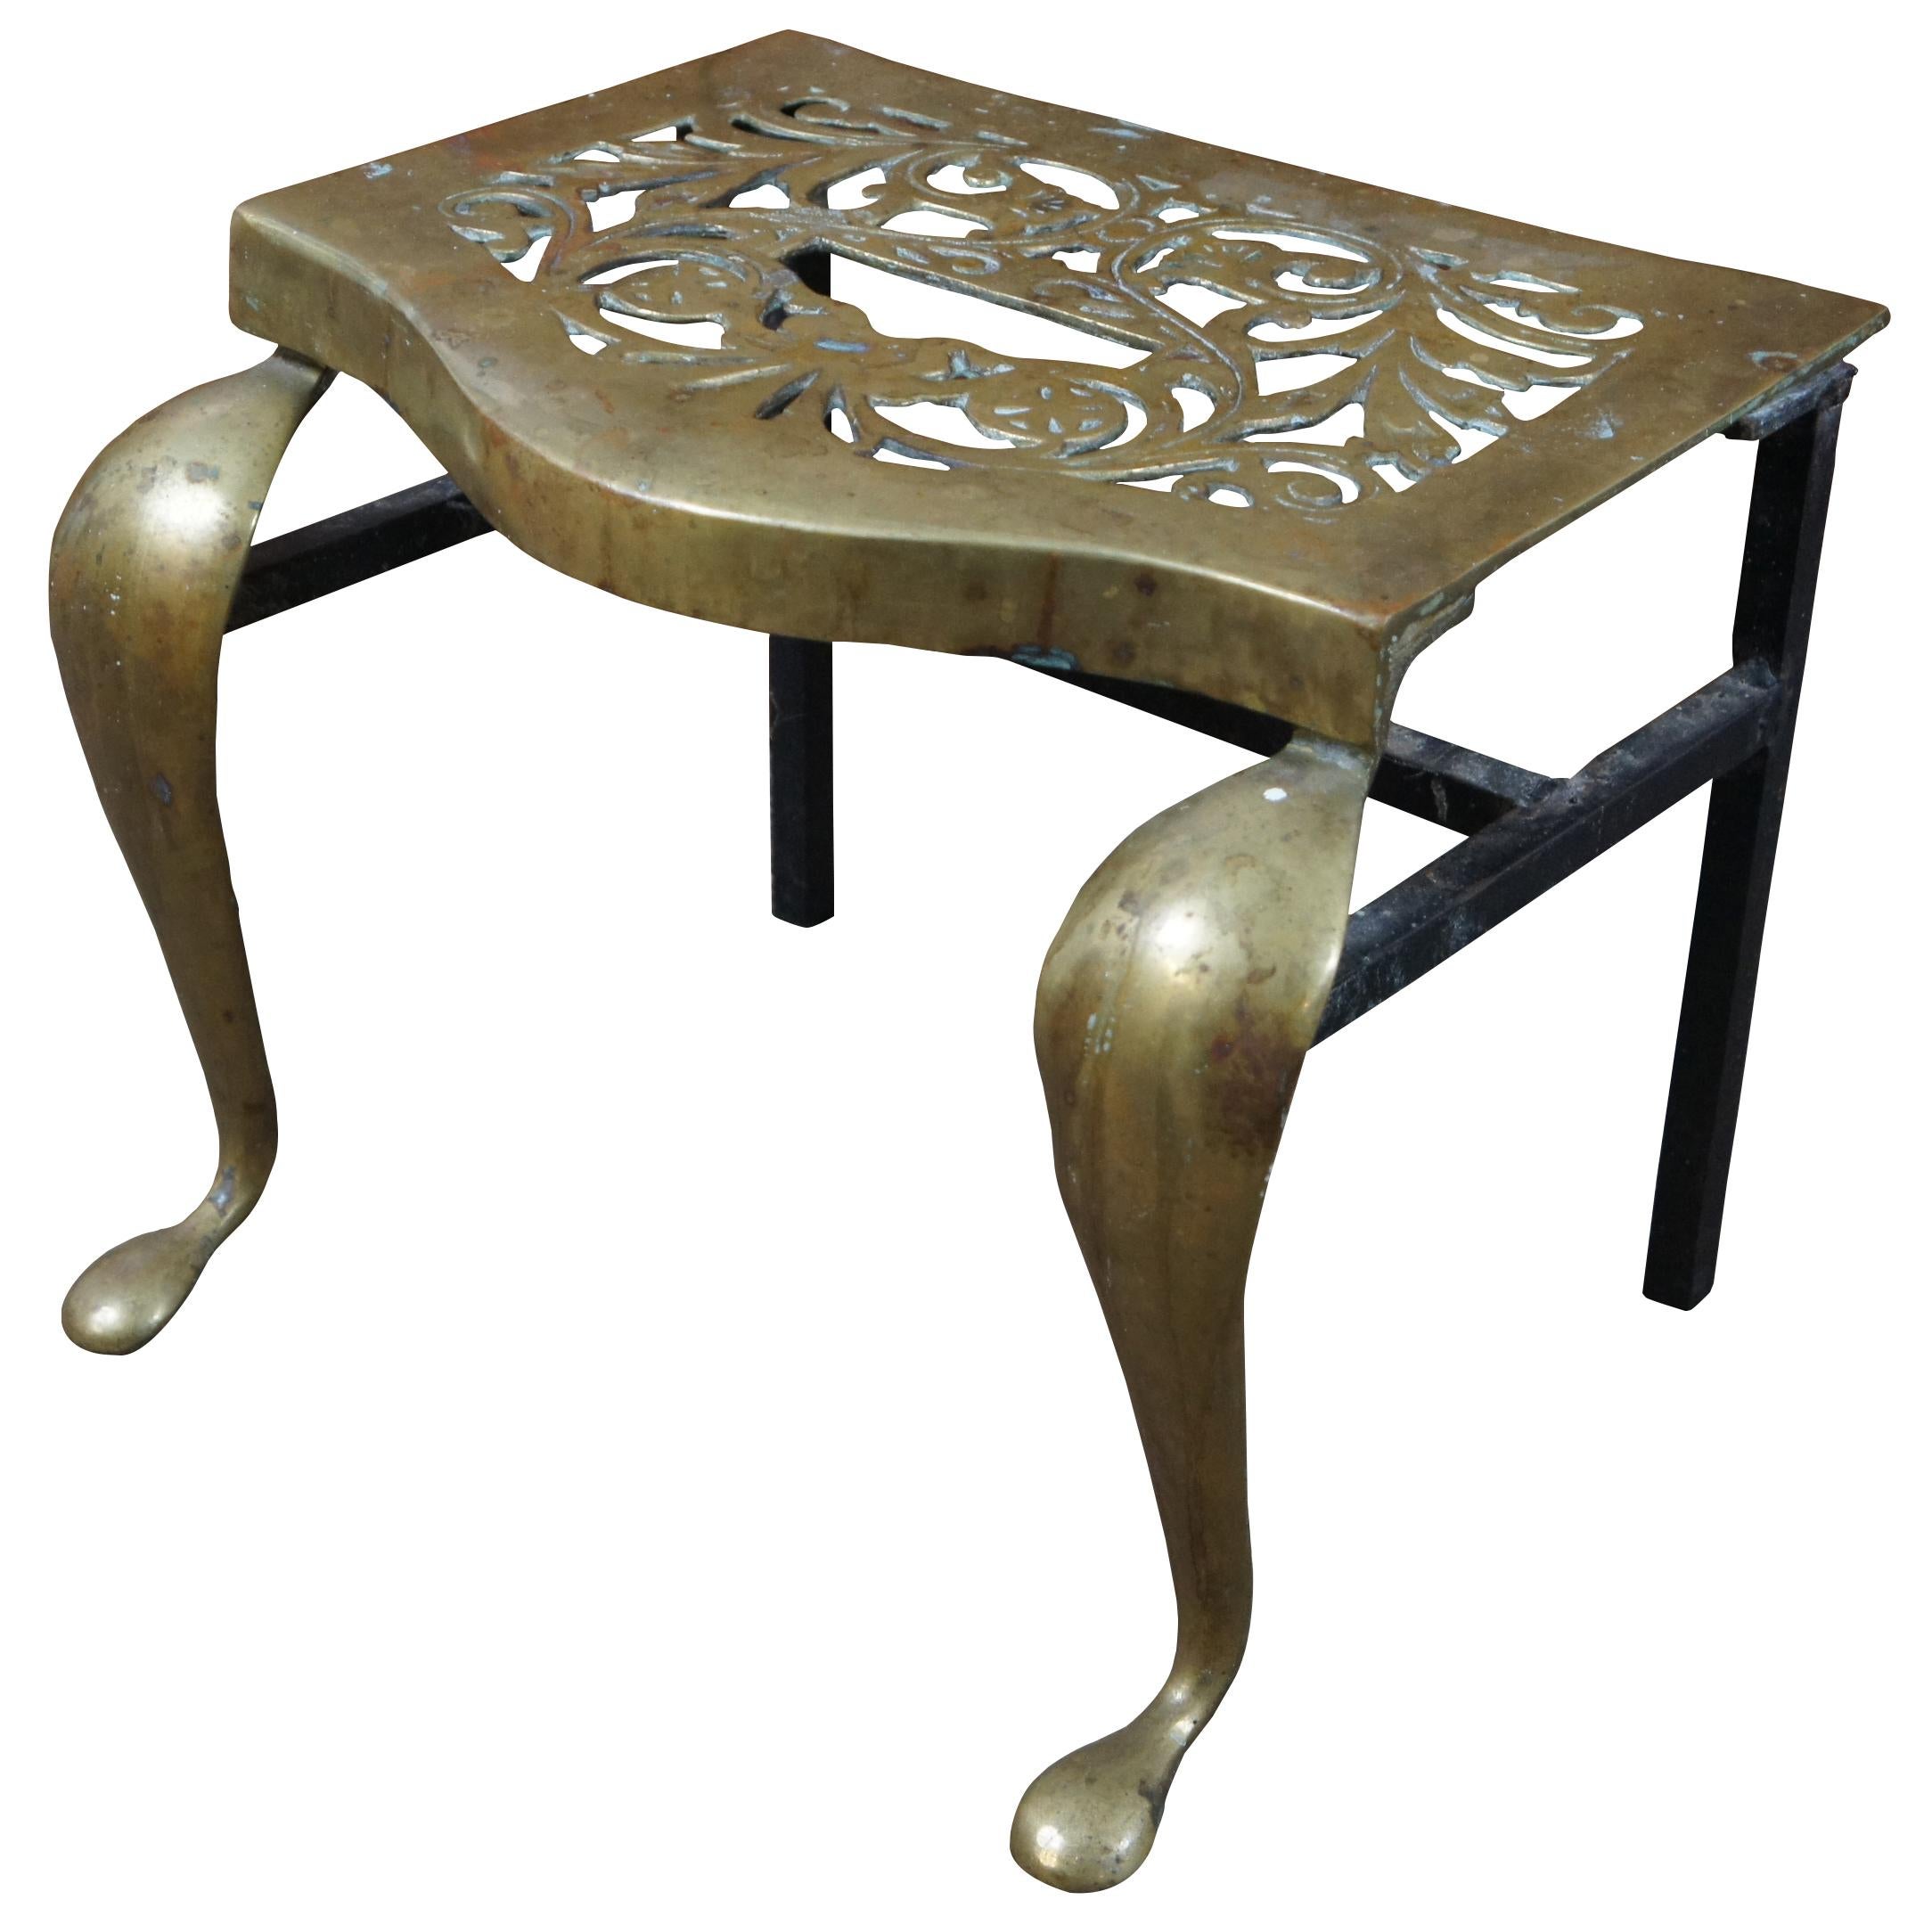 An exceptional and rare early 19th century brass and cast iron fireplace trivet or footman stool. Made by Old World FDRY Guild in 1809. Great for use as a bench or stand. Features cabriole front legs and pierced / reticulated leaf pattern design